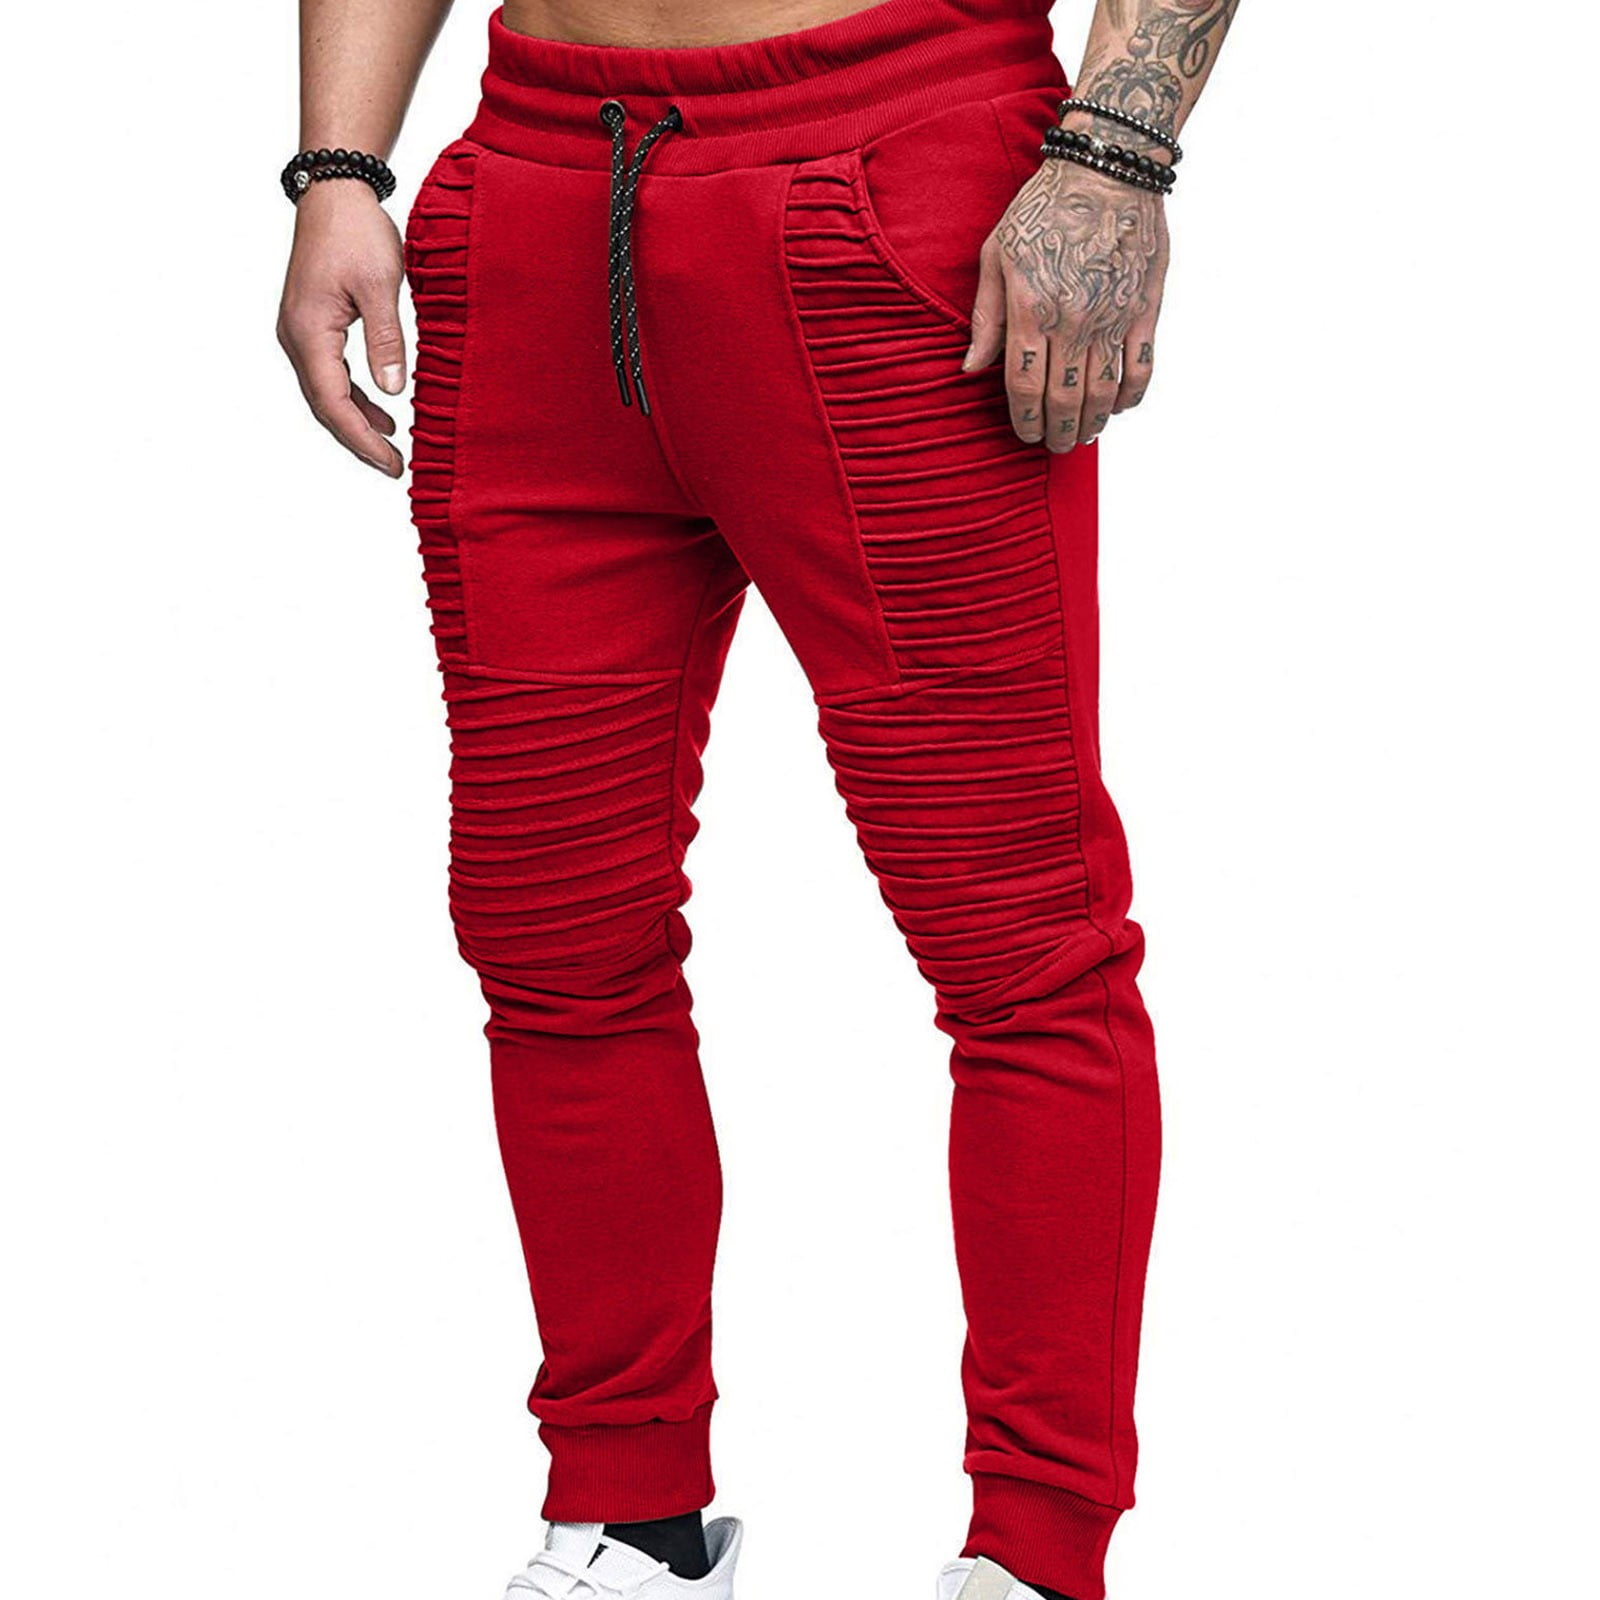 outfmvch joggers for men elastic mid-waist track jogging pleated pocket ...